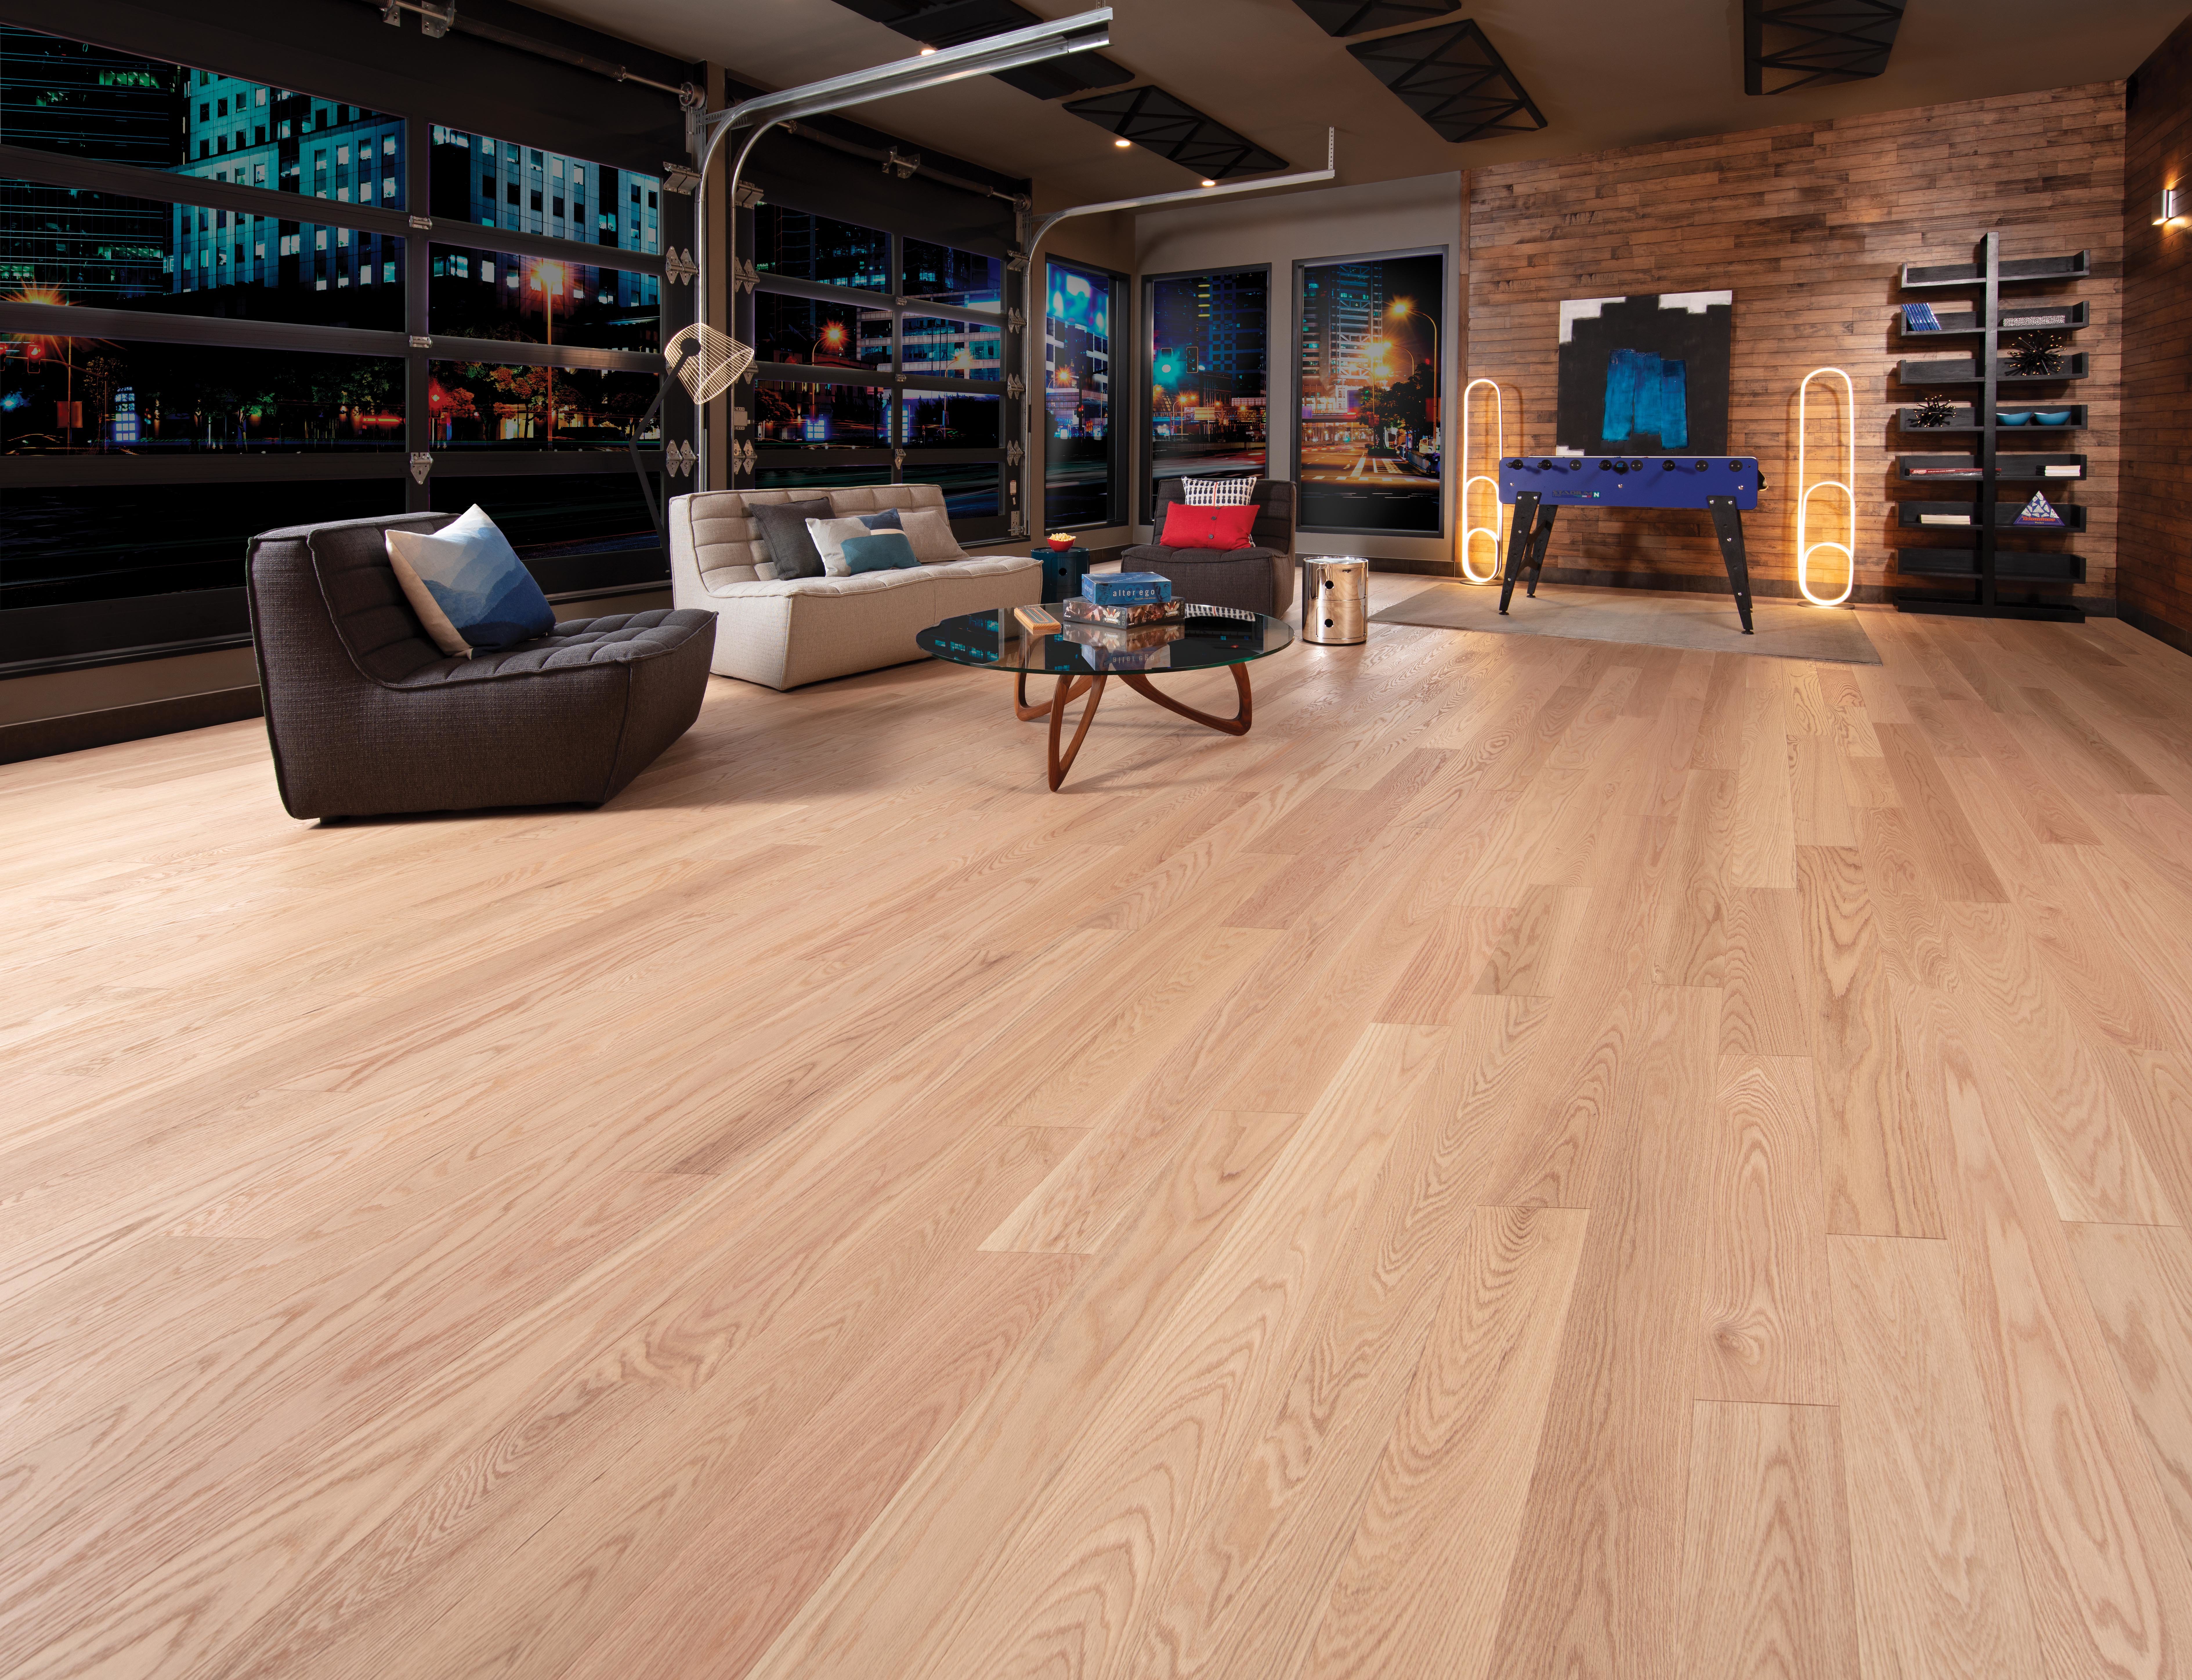 Red Oak Natural Exclusive Brushed - Ambience image